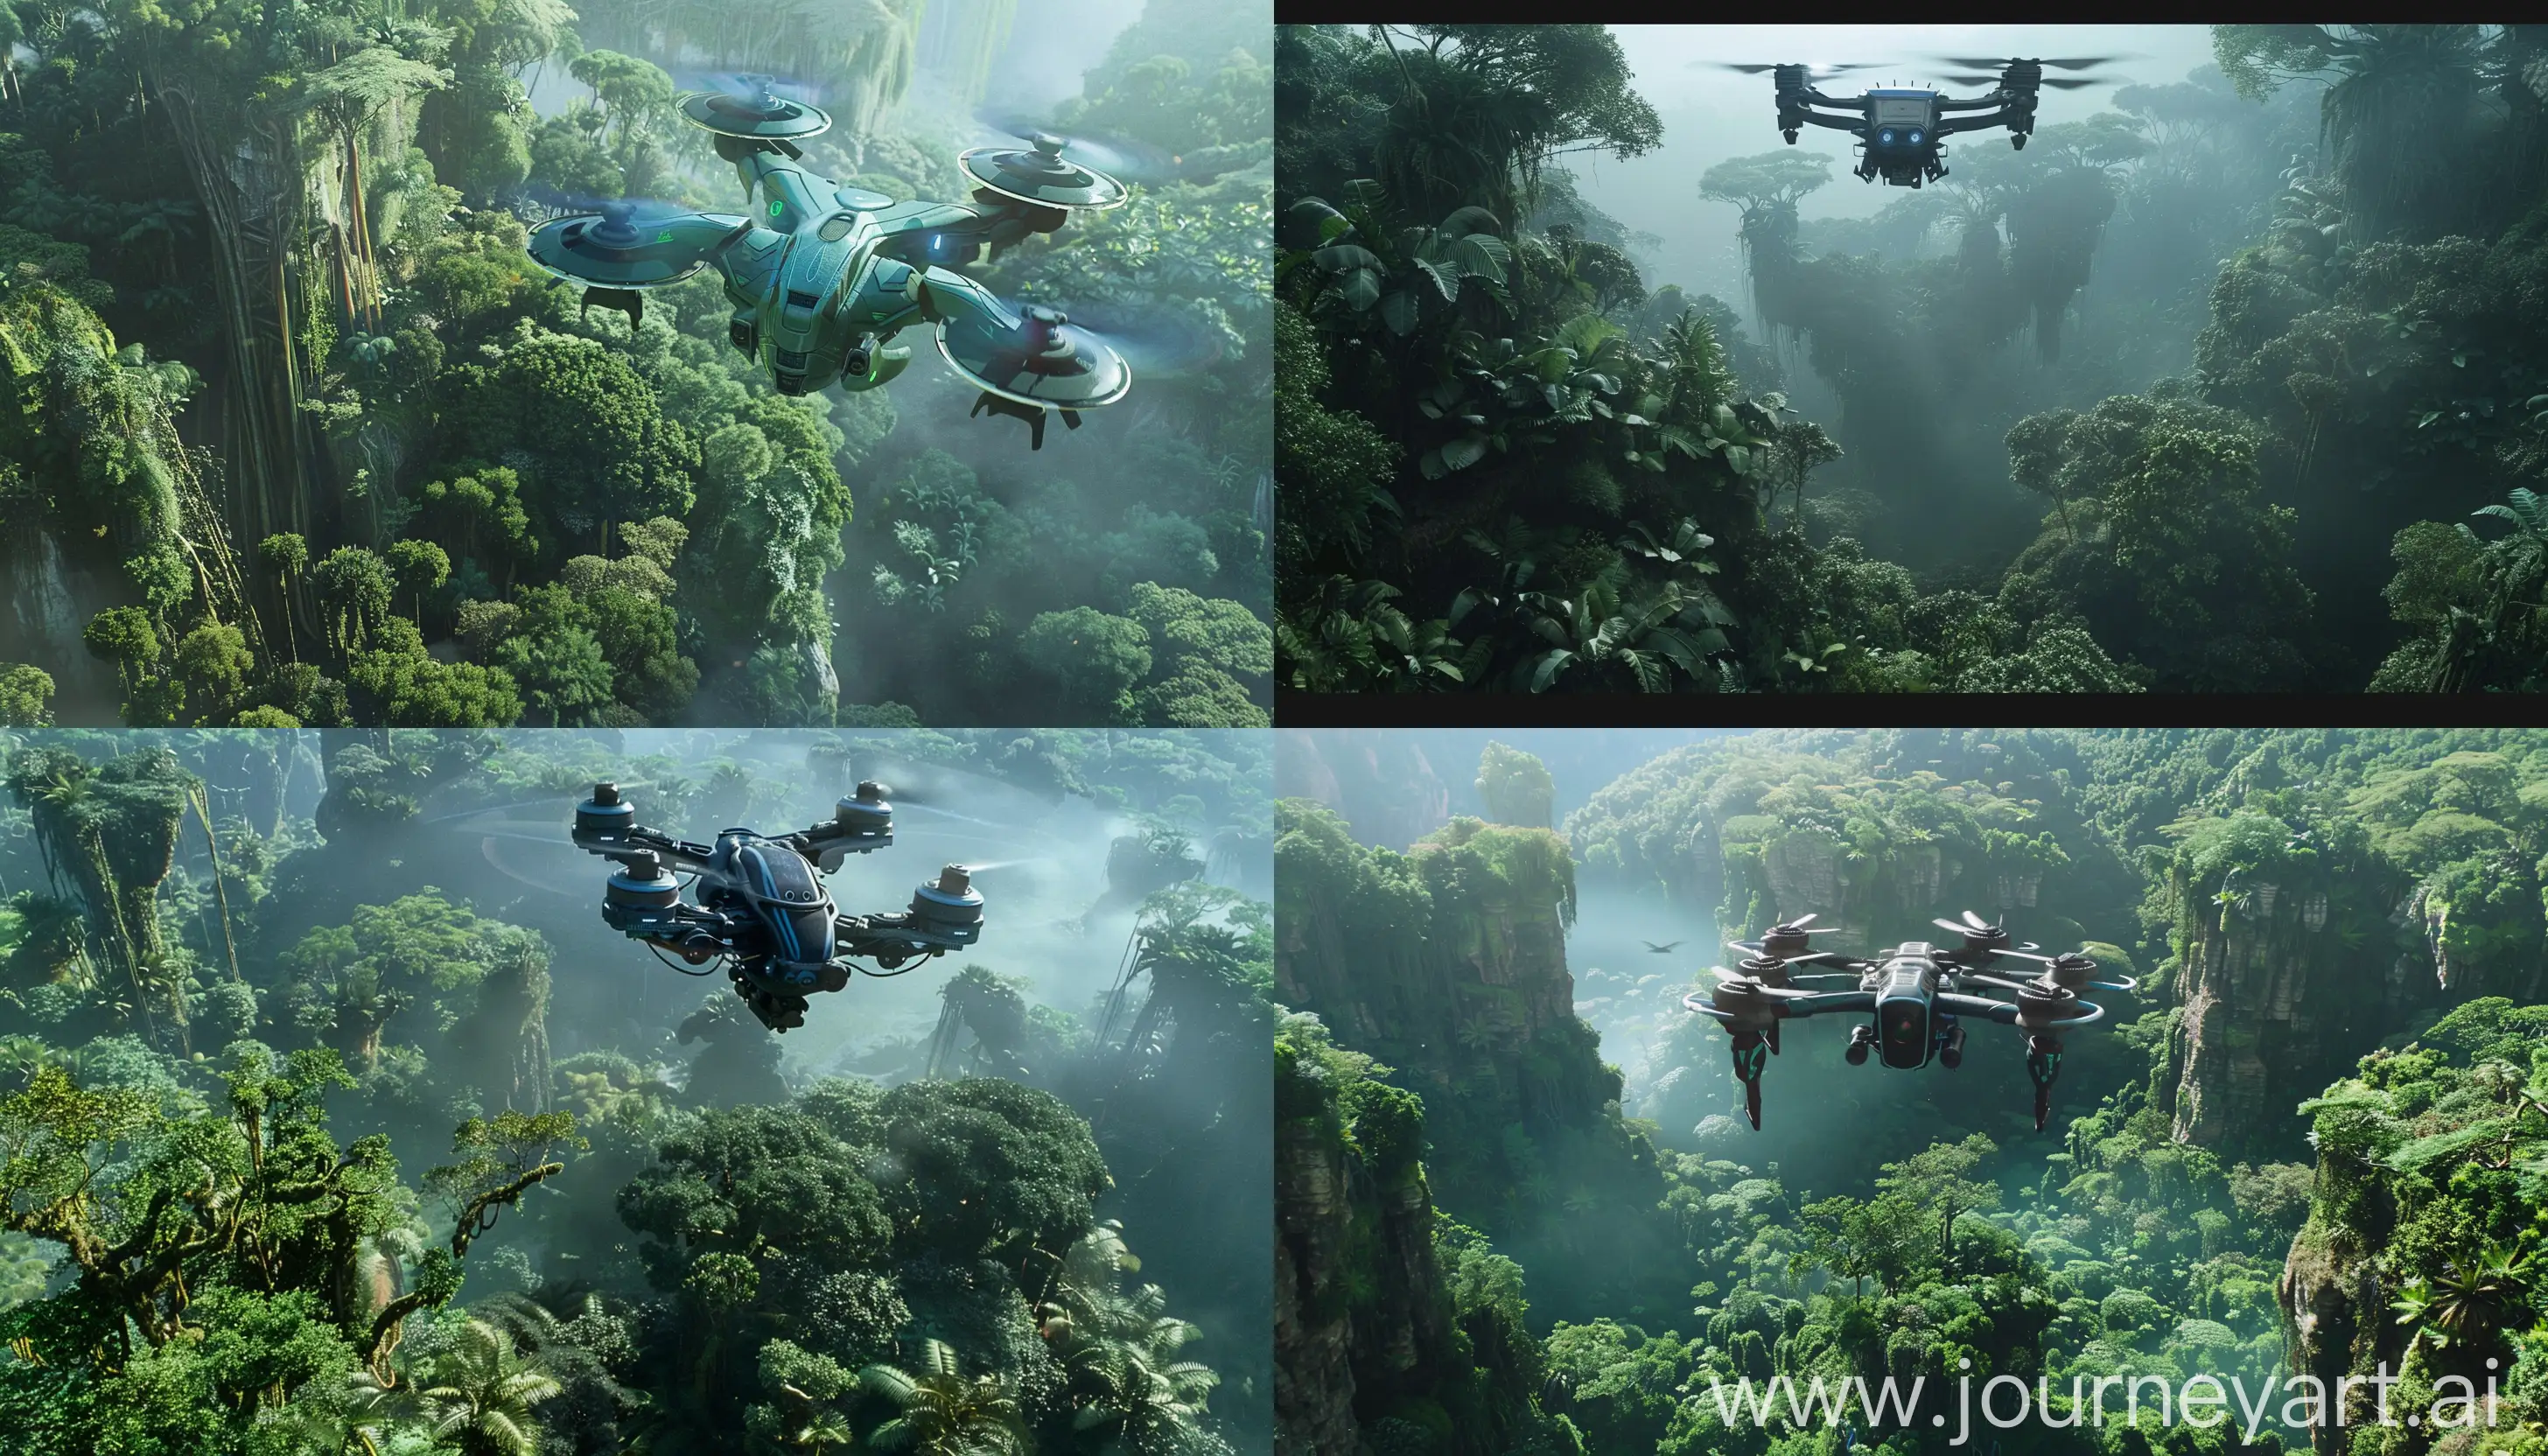 https://image-1.uhdpaper.com/wallpaper/avatar-the-way-of-water-movie-8k-wallpaper-uhdpaper.com-290@1@j.jpg A drone’s view of Jake Sully from Avatar: The Way of Water flying over the Pandora forest, preserving the beauty of Pandora --style raw --ar 7:4